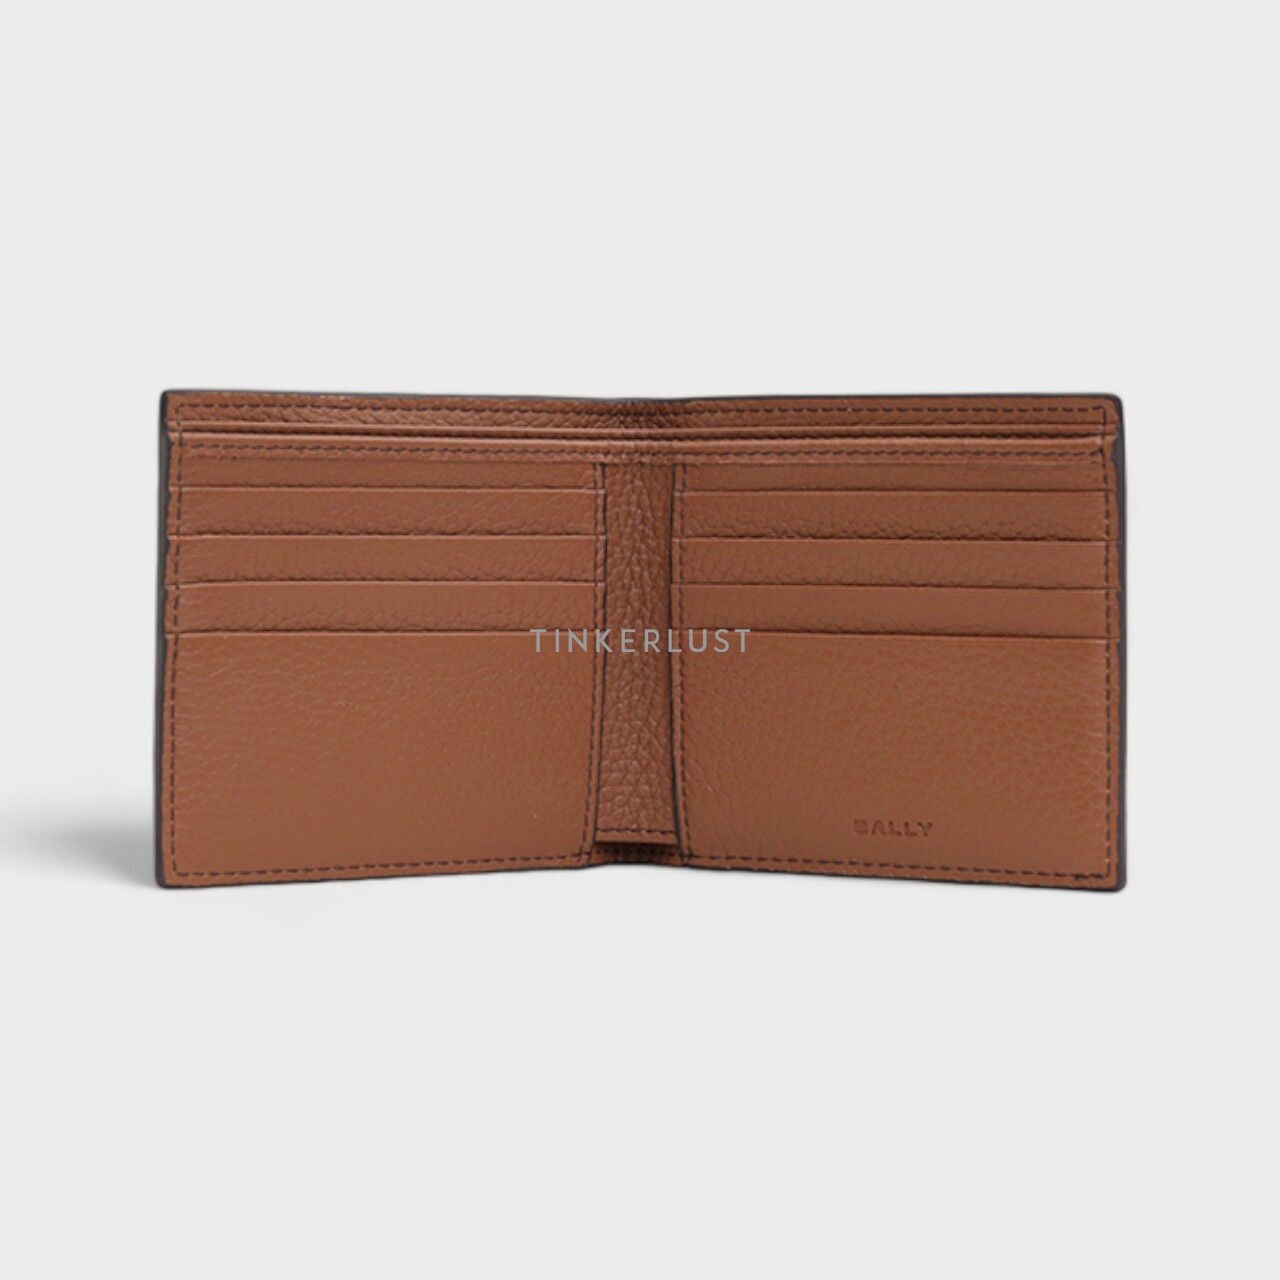 Bally Ribbon Bi-Fold Wallet in Brown Grained Leather with 8 Card Slots Wallet